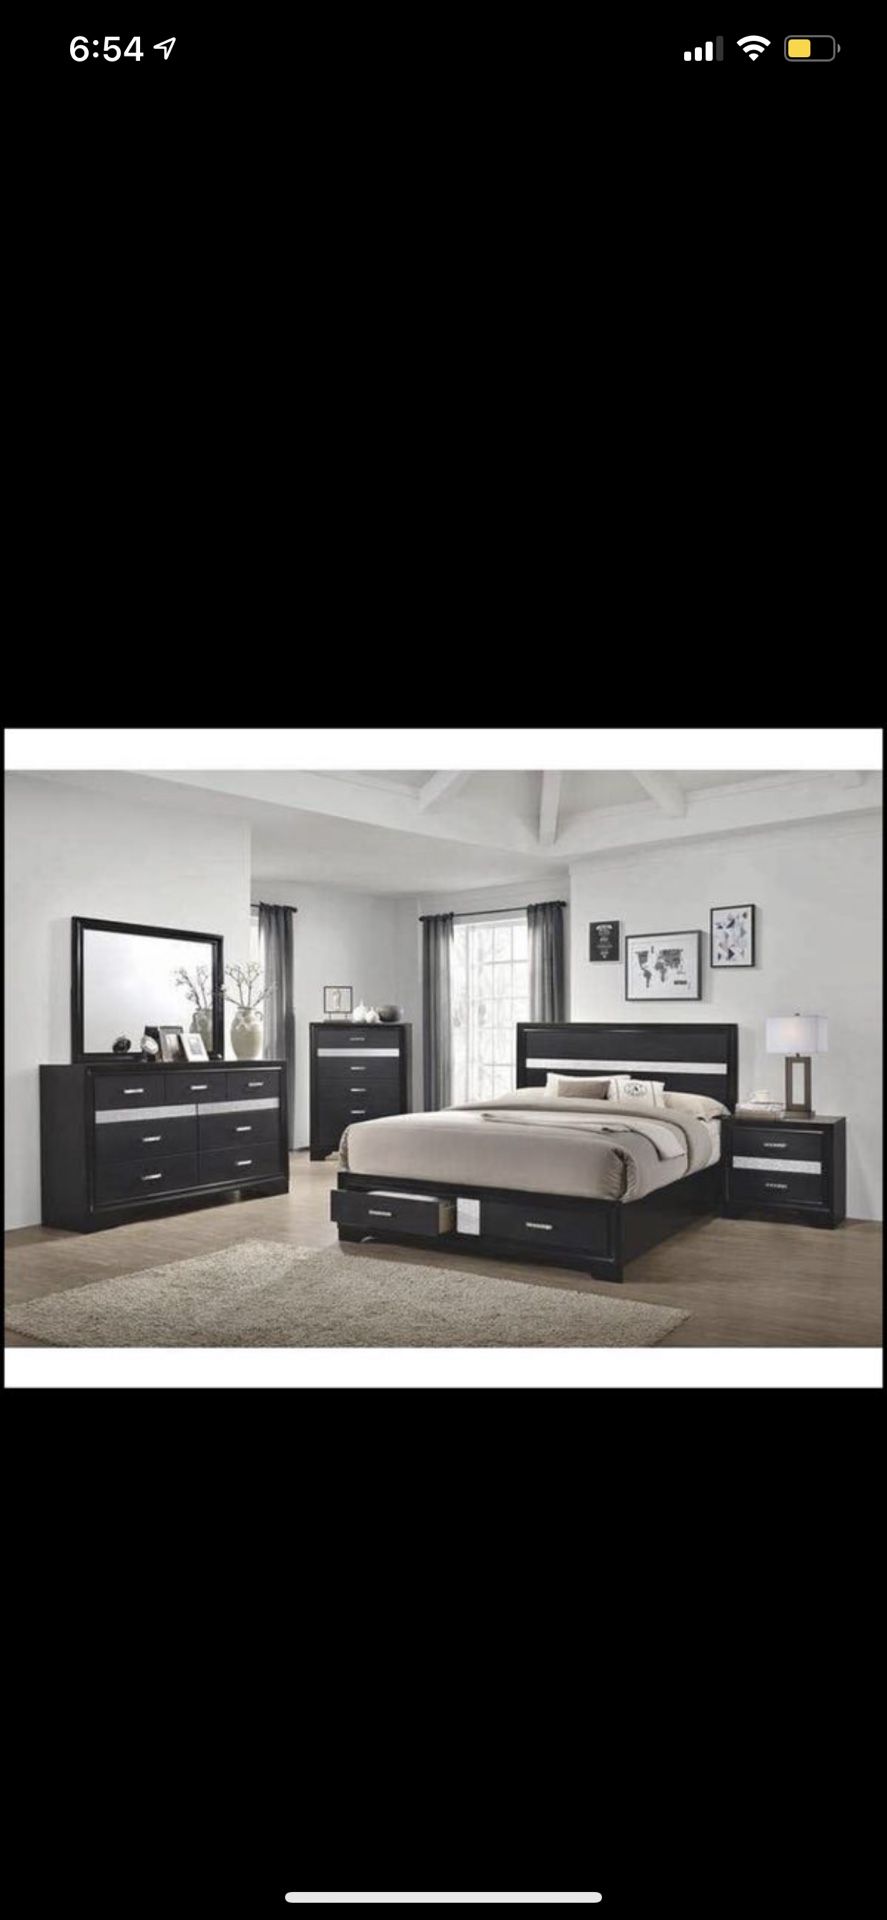 Brand New Complete Bedroom Set With Orthopedic Mattress For $1299